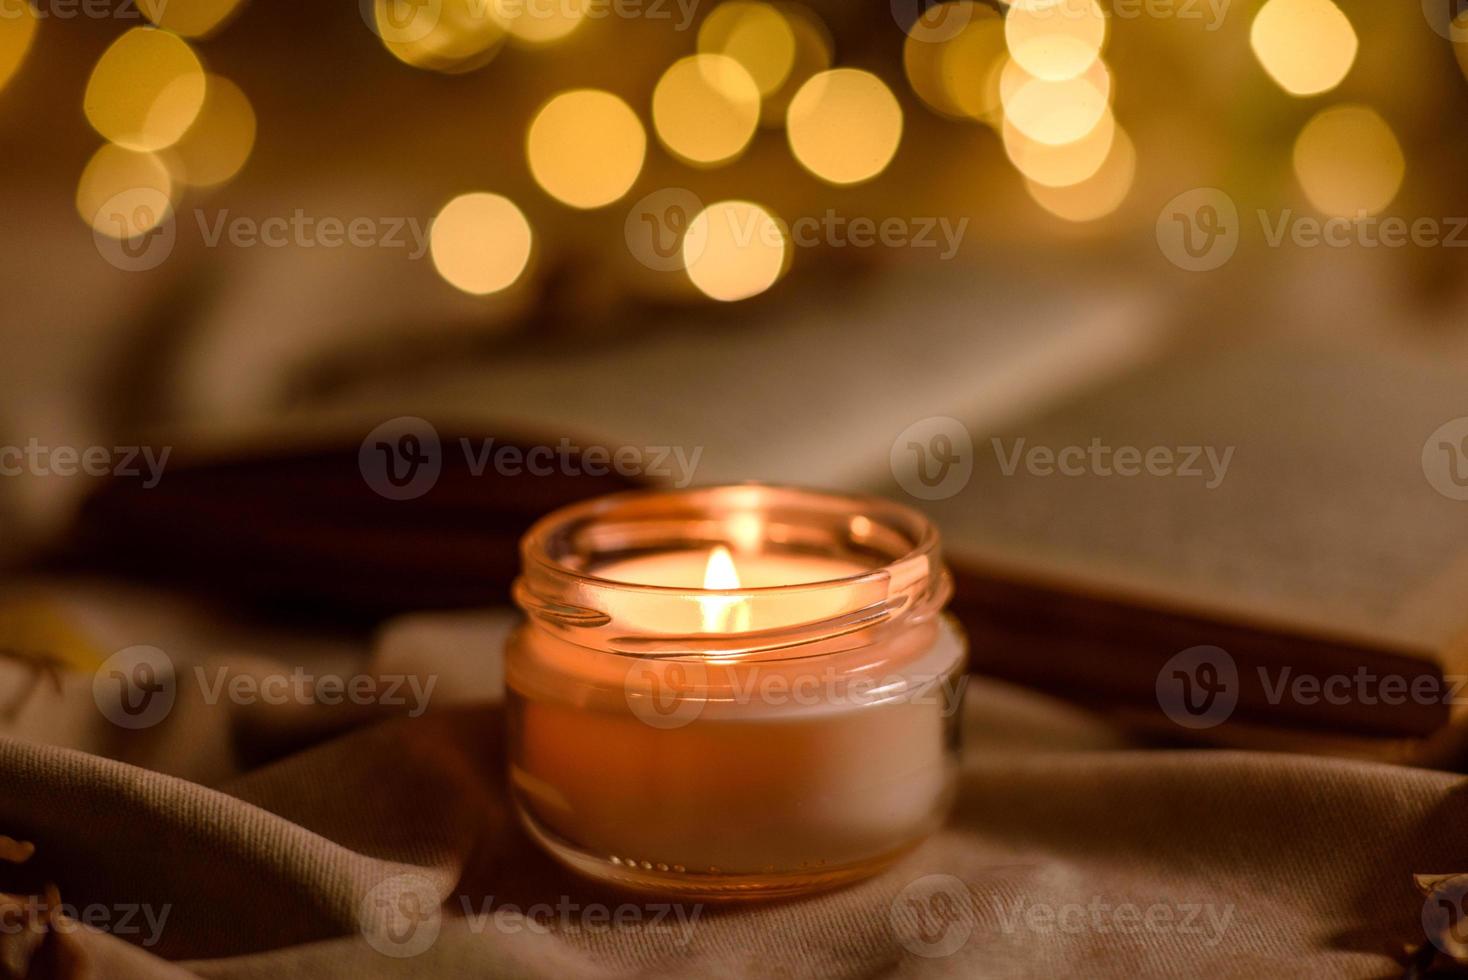 A burning candle on a wooden table in front of a book in a half-mast photo